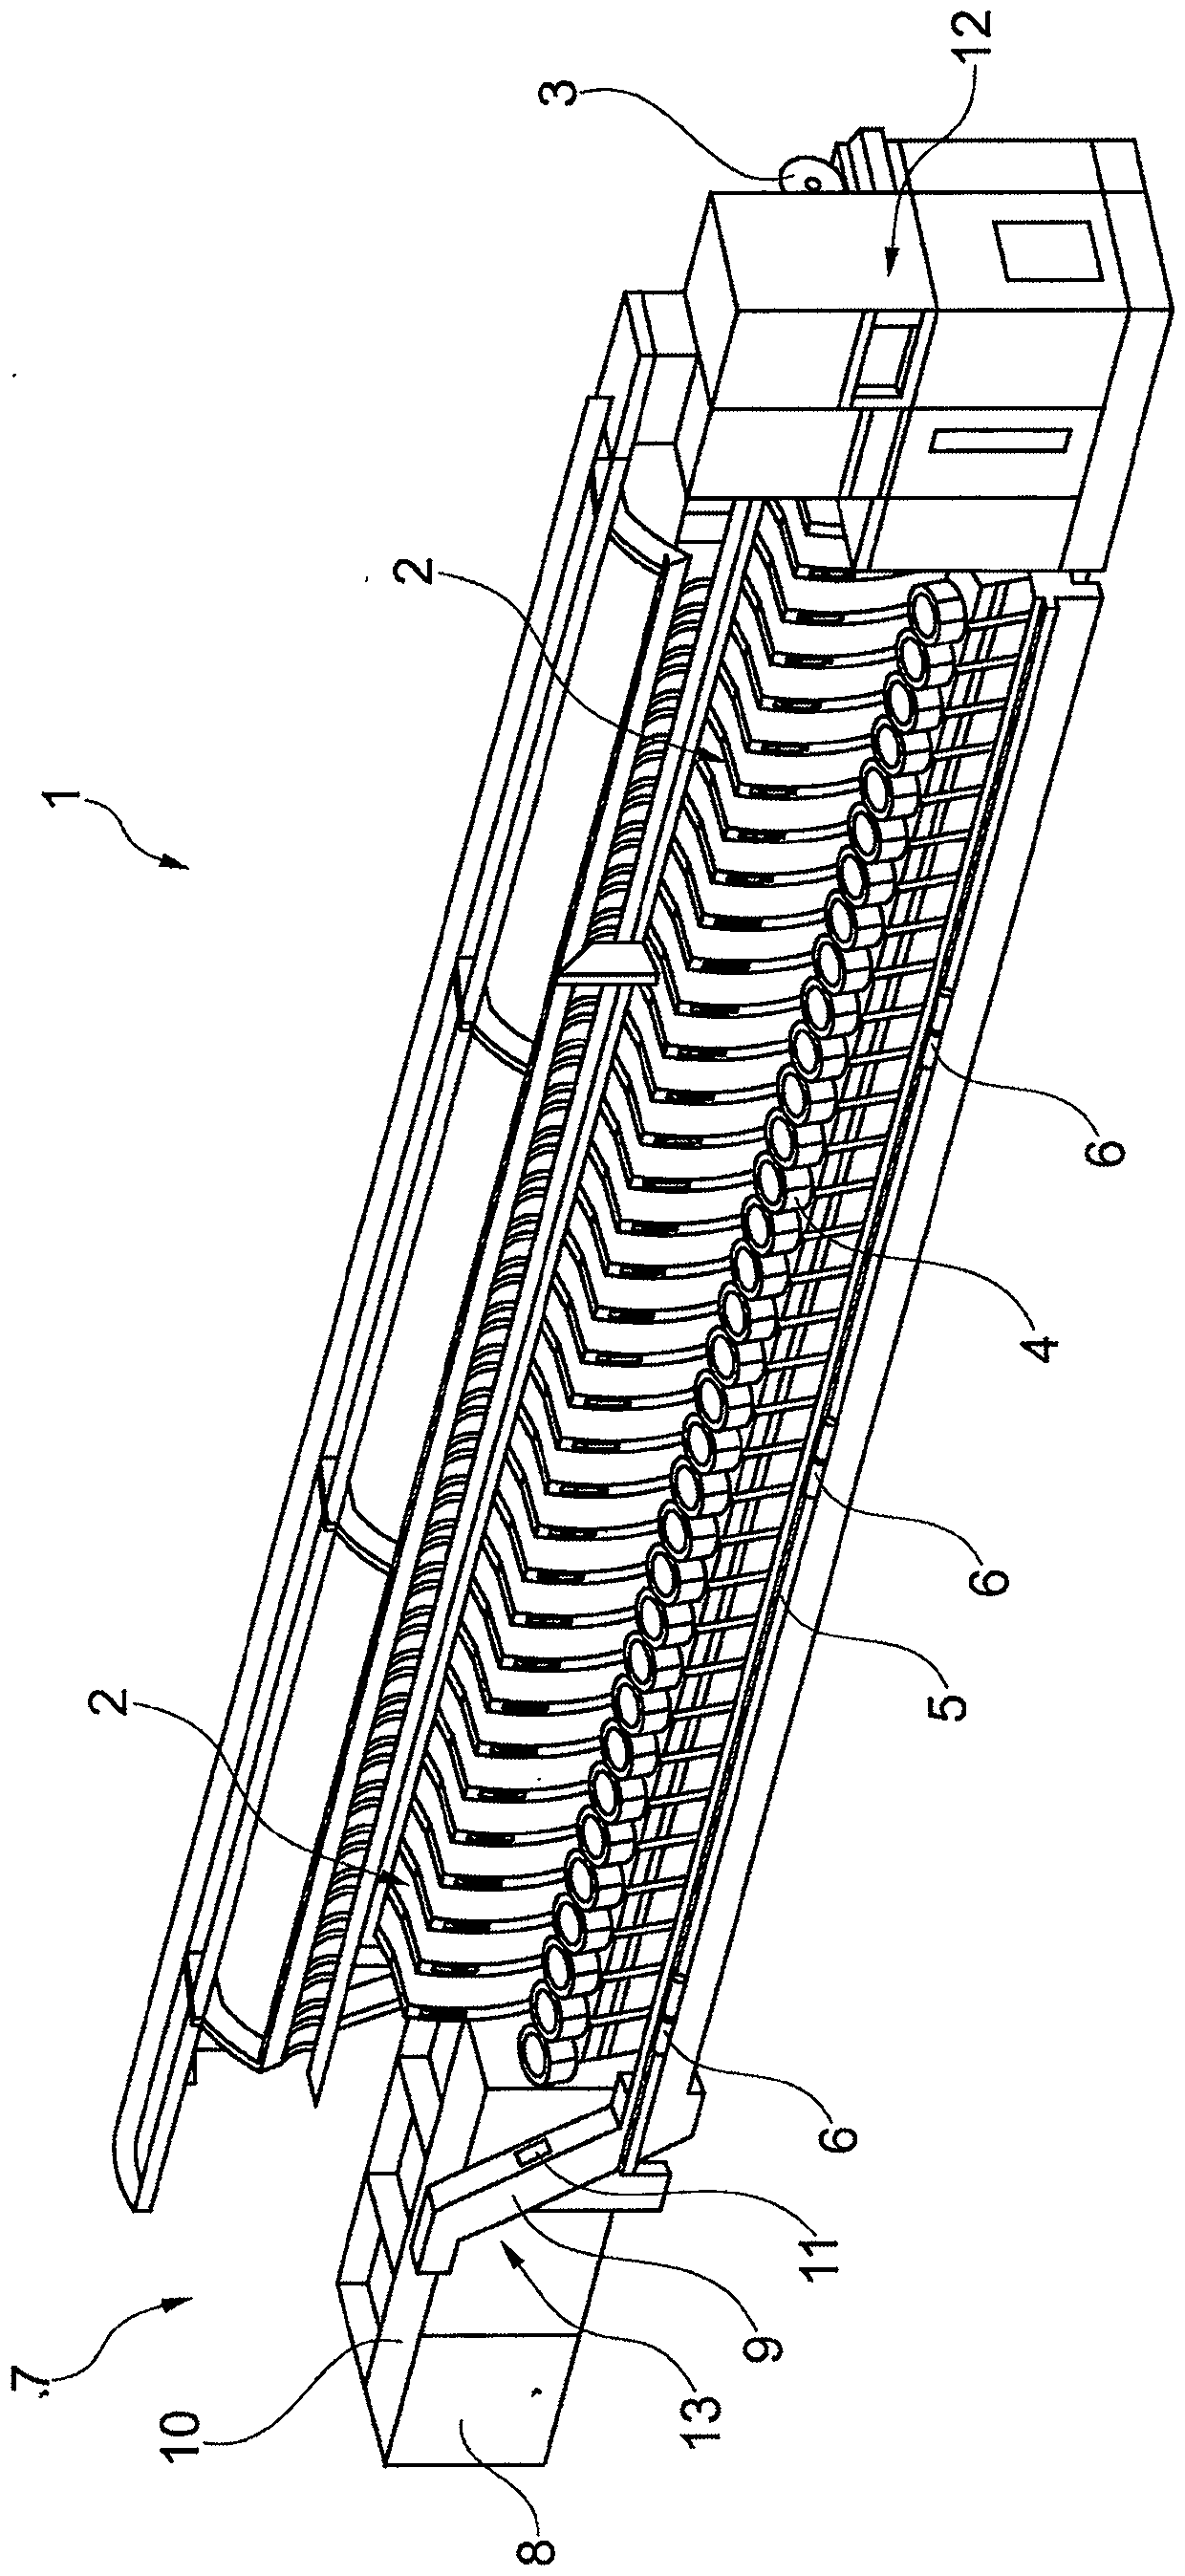 Detection device for recognizing yarn residue on spinning tube